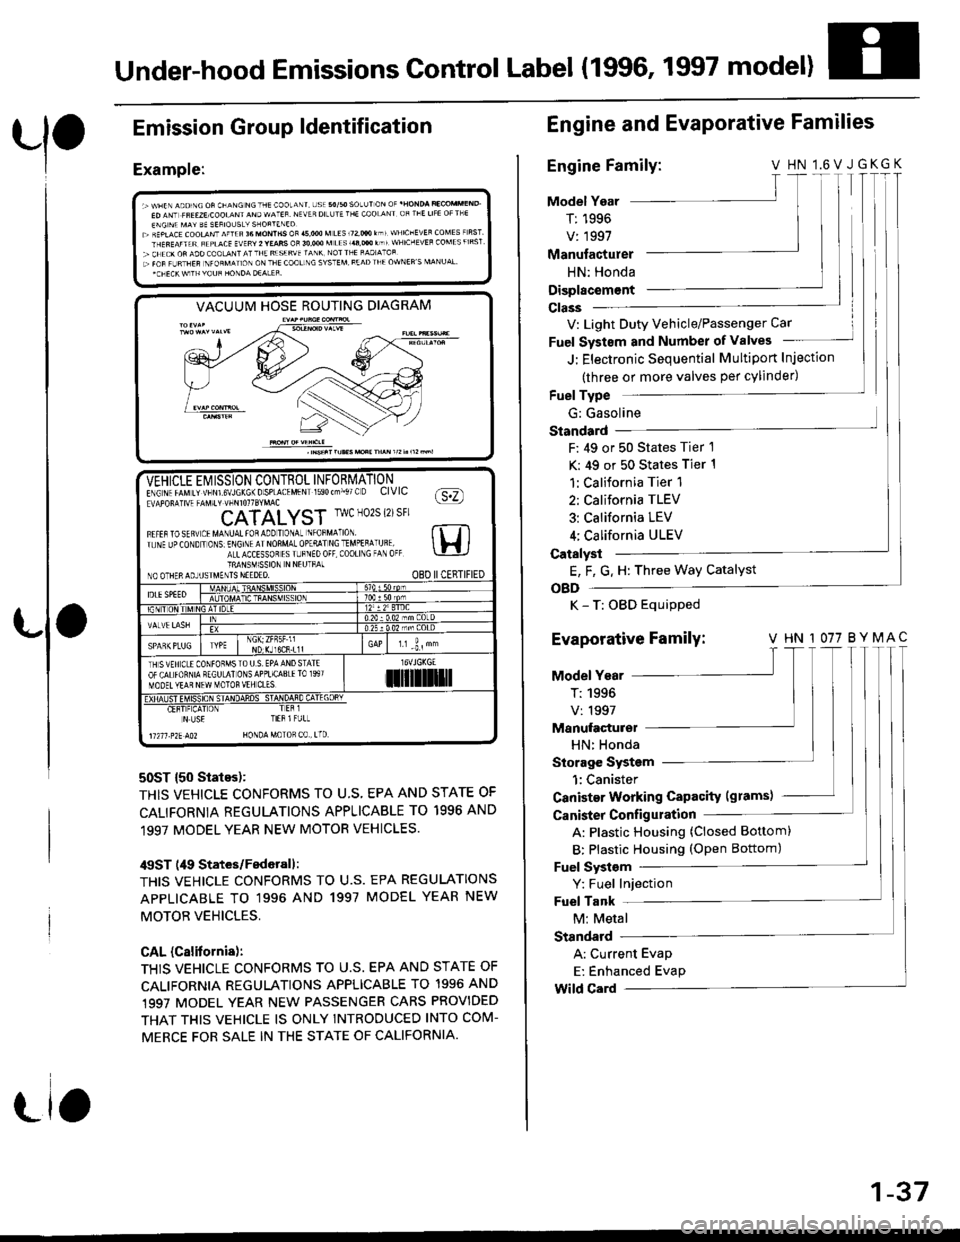 HONDA CIVIC 2000 6.G Workshop Manual Under-hood Emissions Control Label (1996, 1997 model)
Emission
Example:
Group ldentification
VACUUM HOSE ROUTING DIAGRAM
50ST {50 States):
THIS VEHICLE CONFORMS TO U.S, EPA AND STATE OF
CALIFORNIA REG